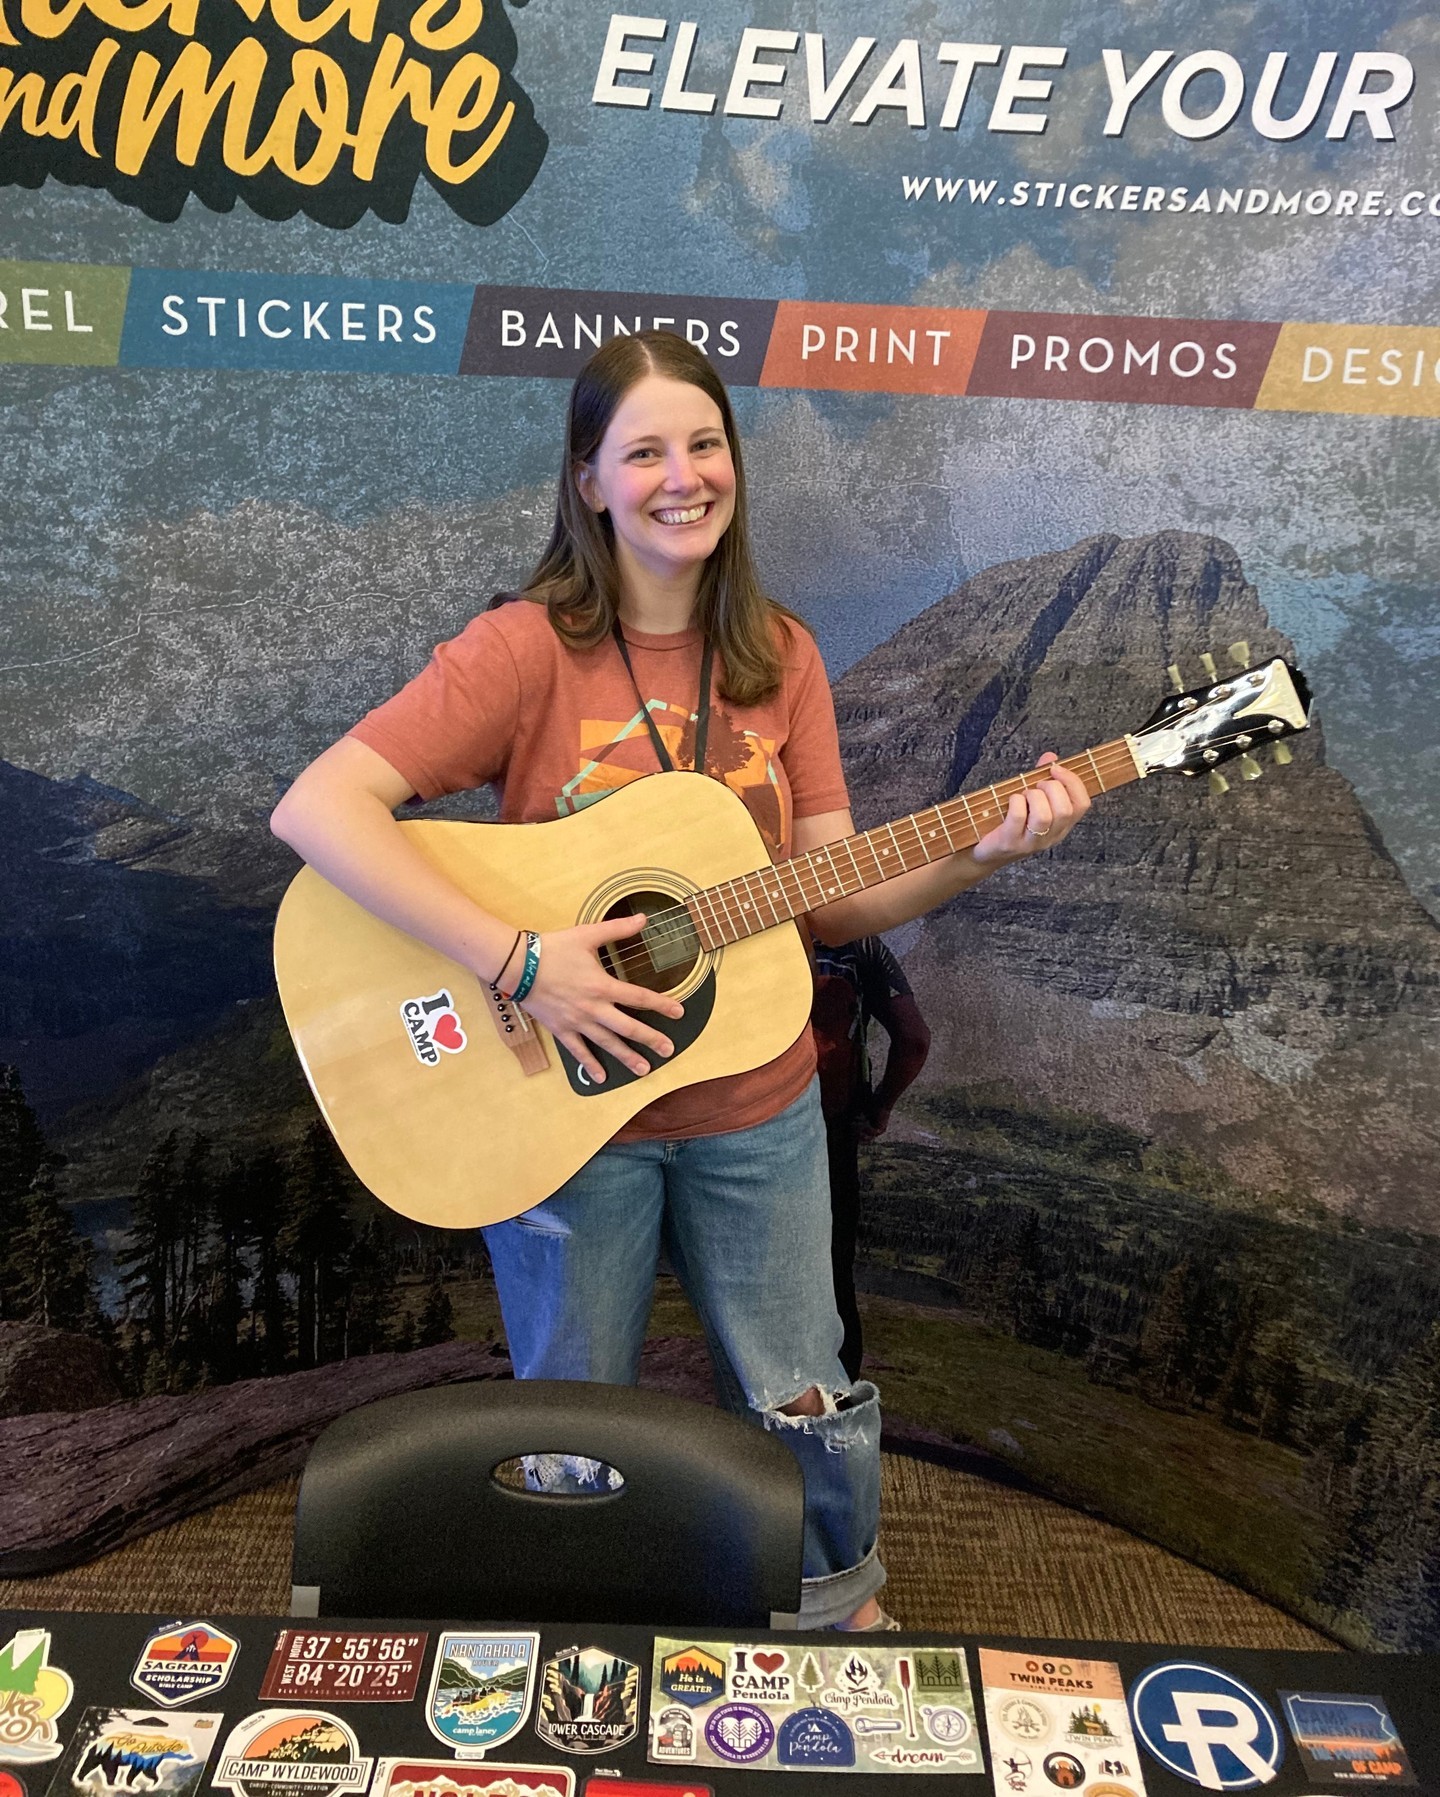 CCCA Ozark Conference 🏕️

Guitar Winner: Kaitlyn McCormmick from Camp Caudle

#StickersAndMore
#ElevateYourBrand